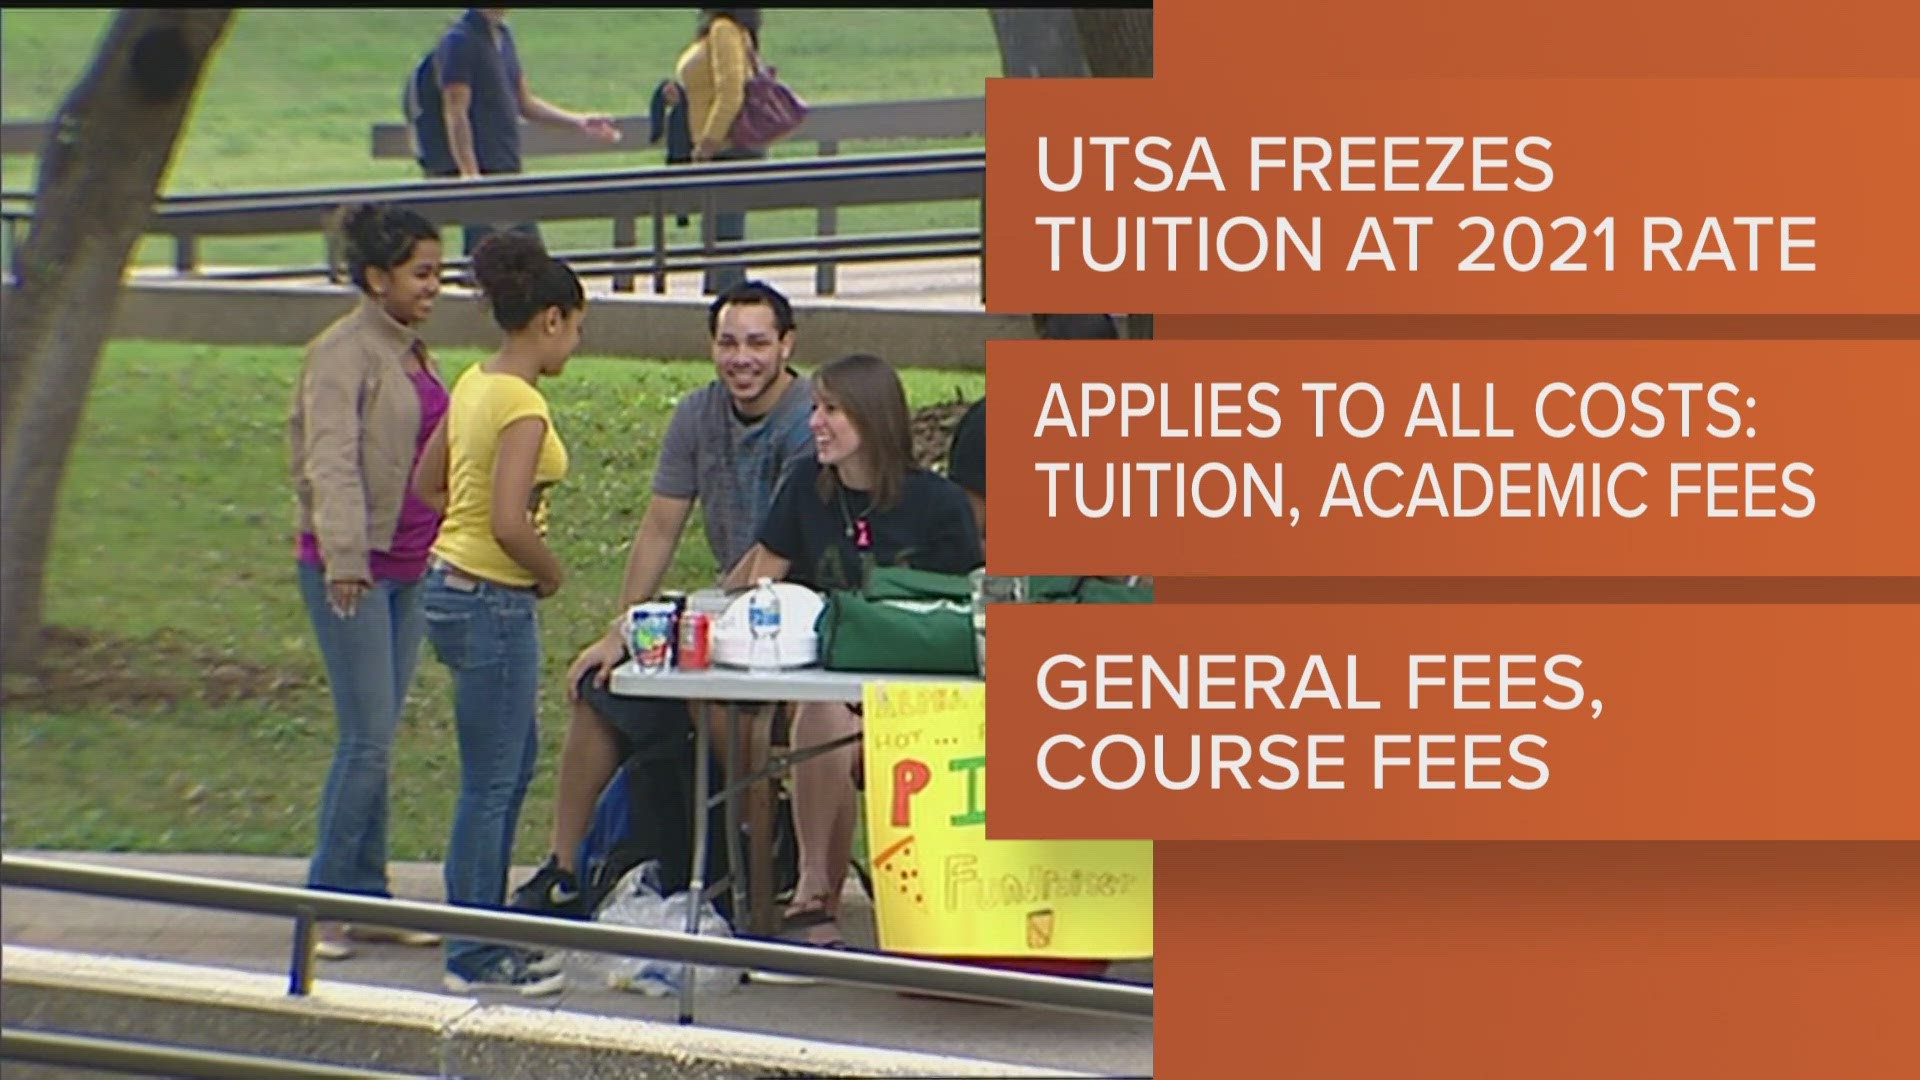 UTSA announced it will freeze tuition, making it more affordable for students and thier families.